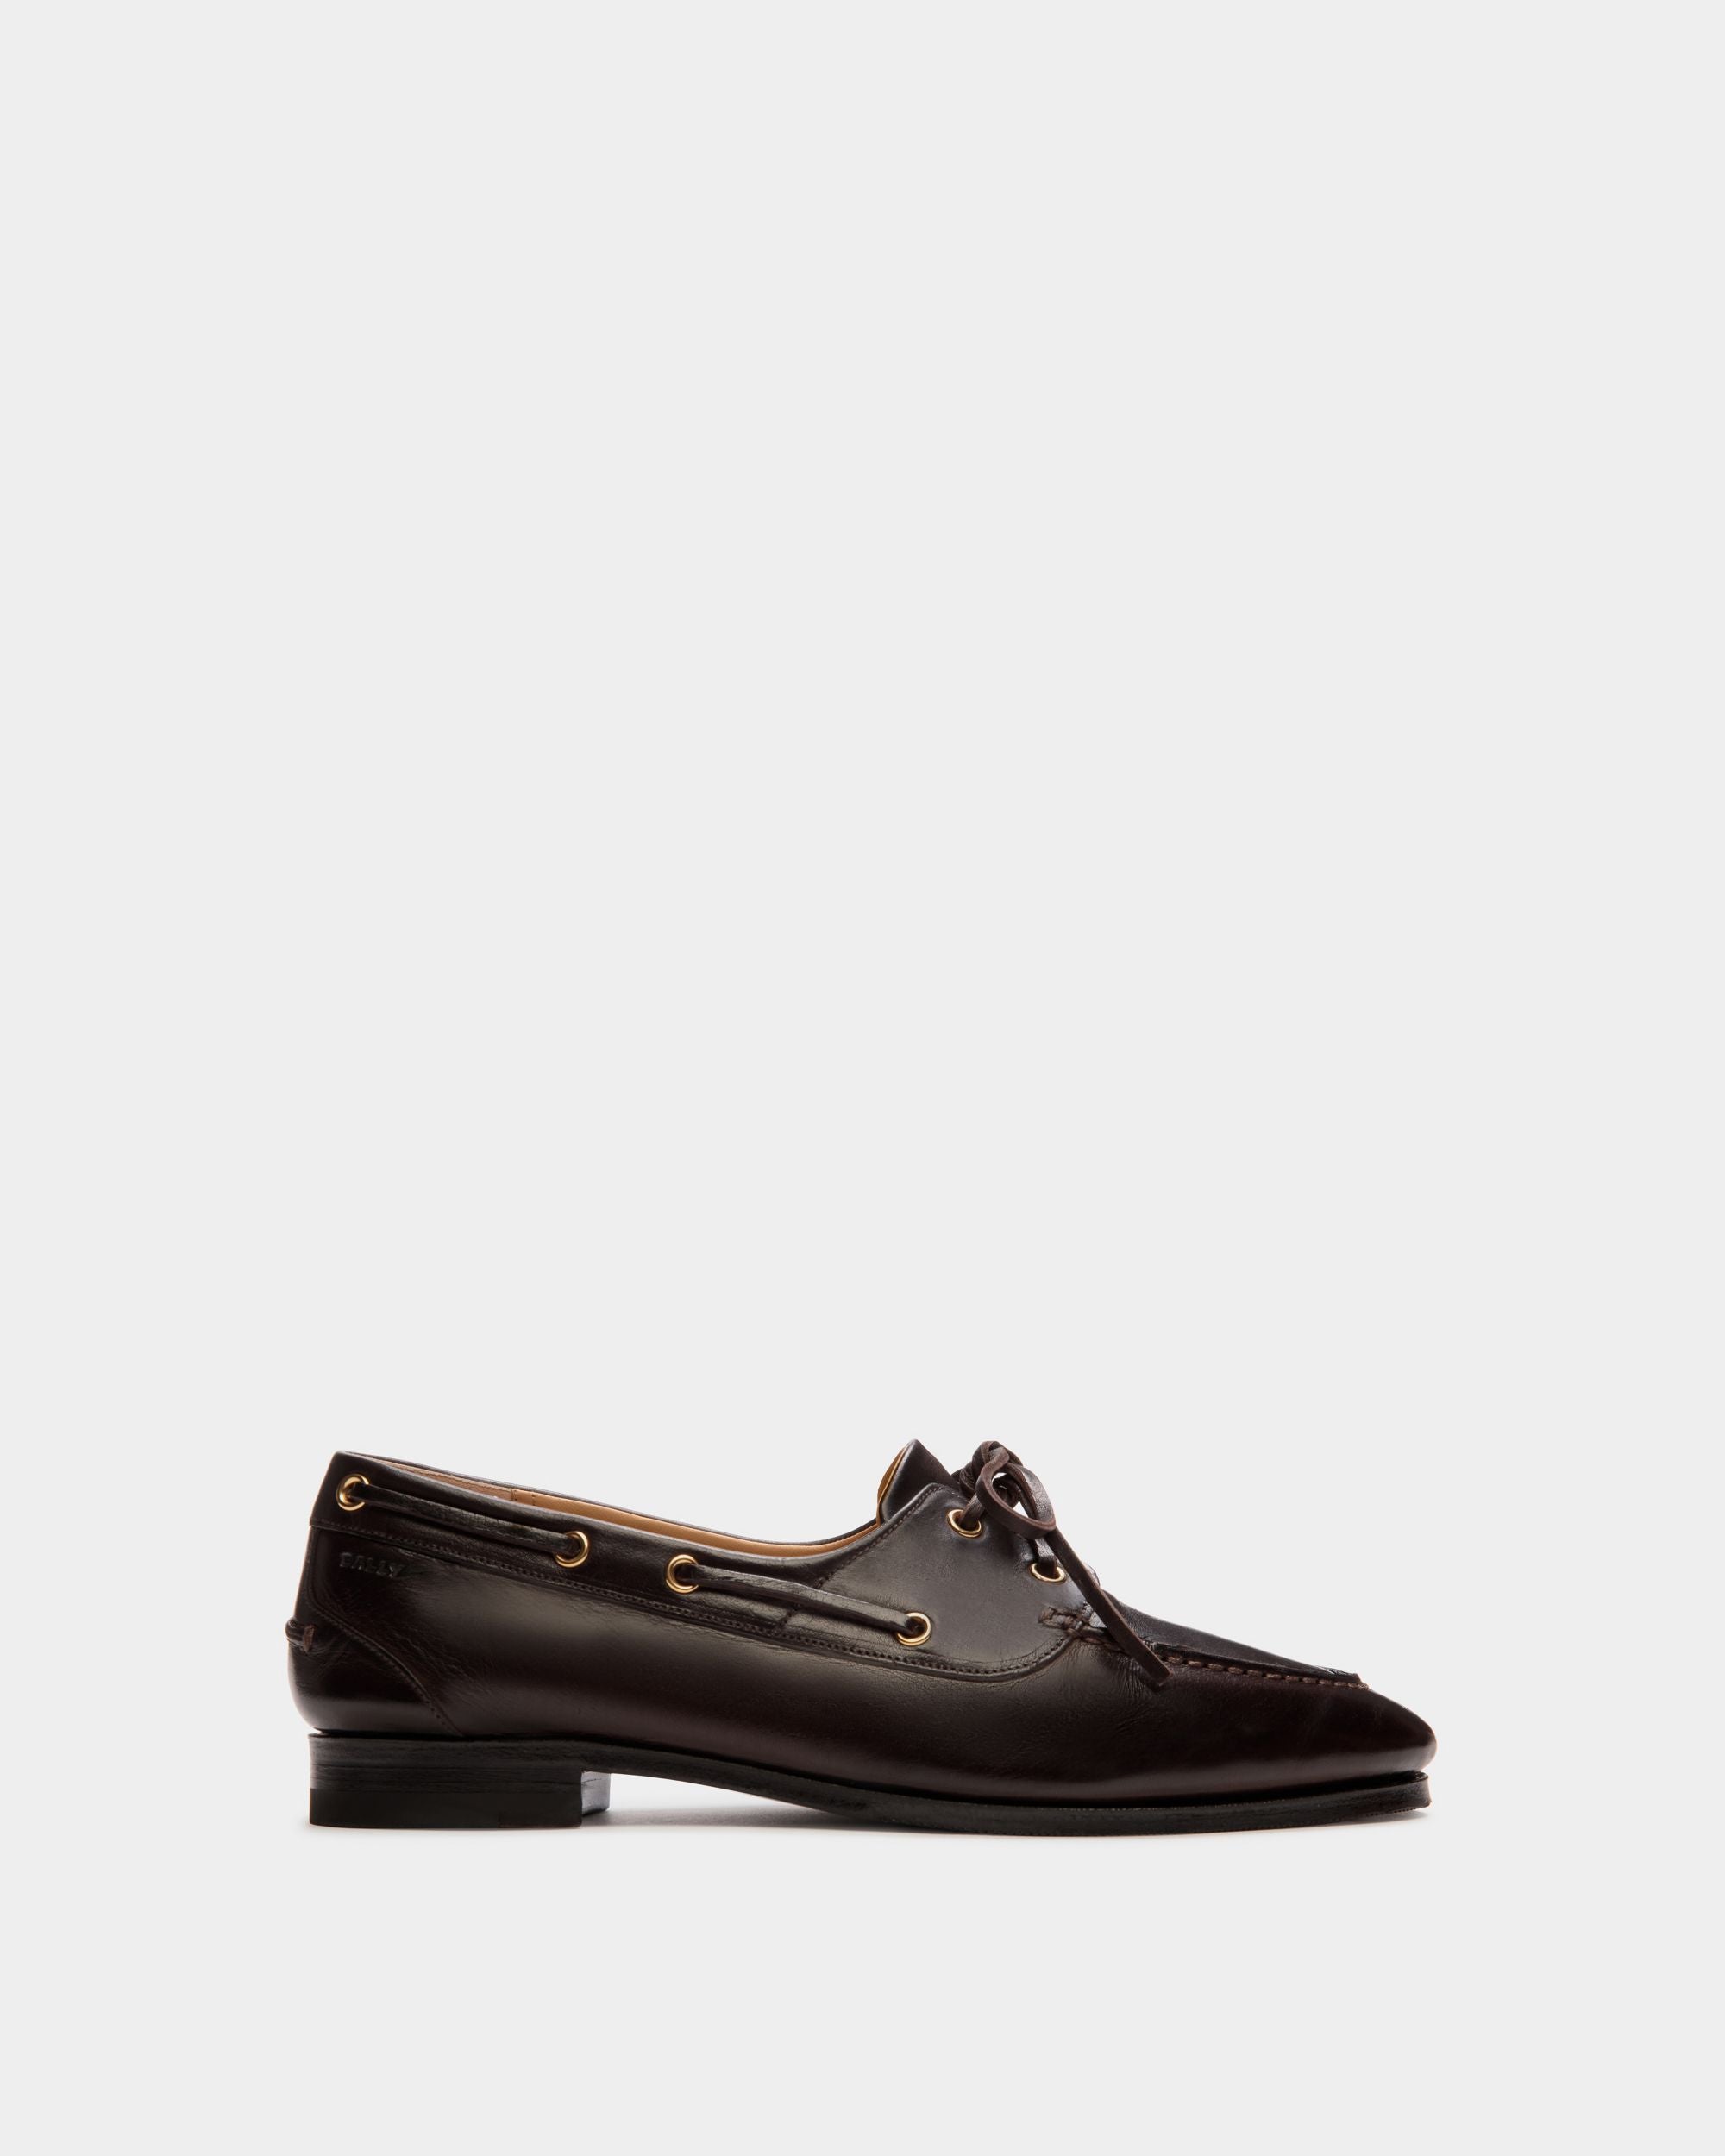 Plume | Women's Moccasin in Dark Brown Leather | Bally | Still Life Side